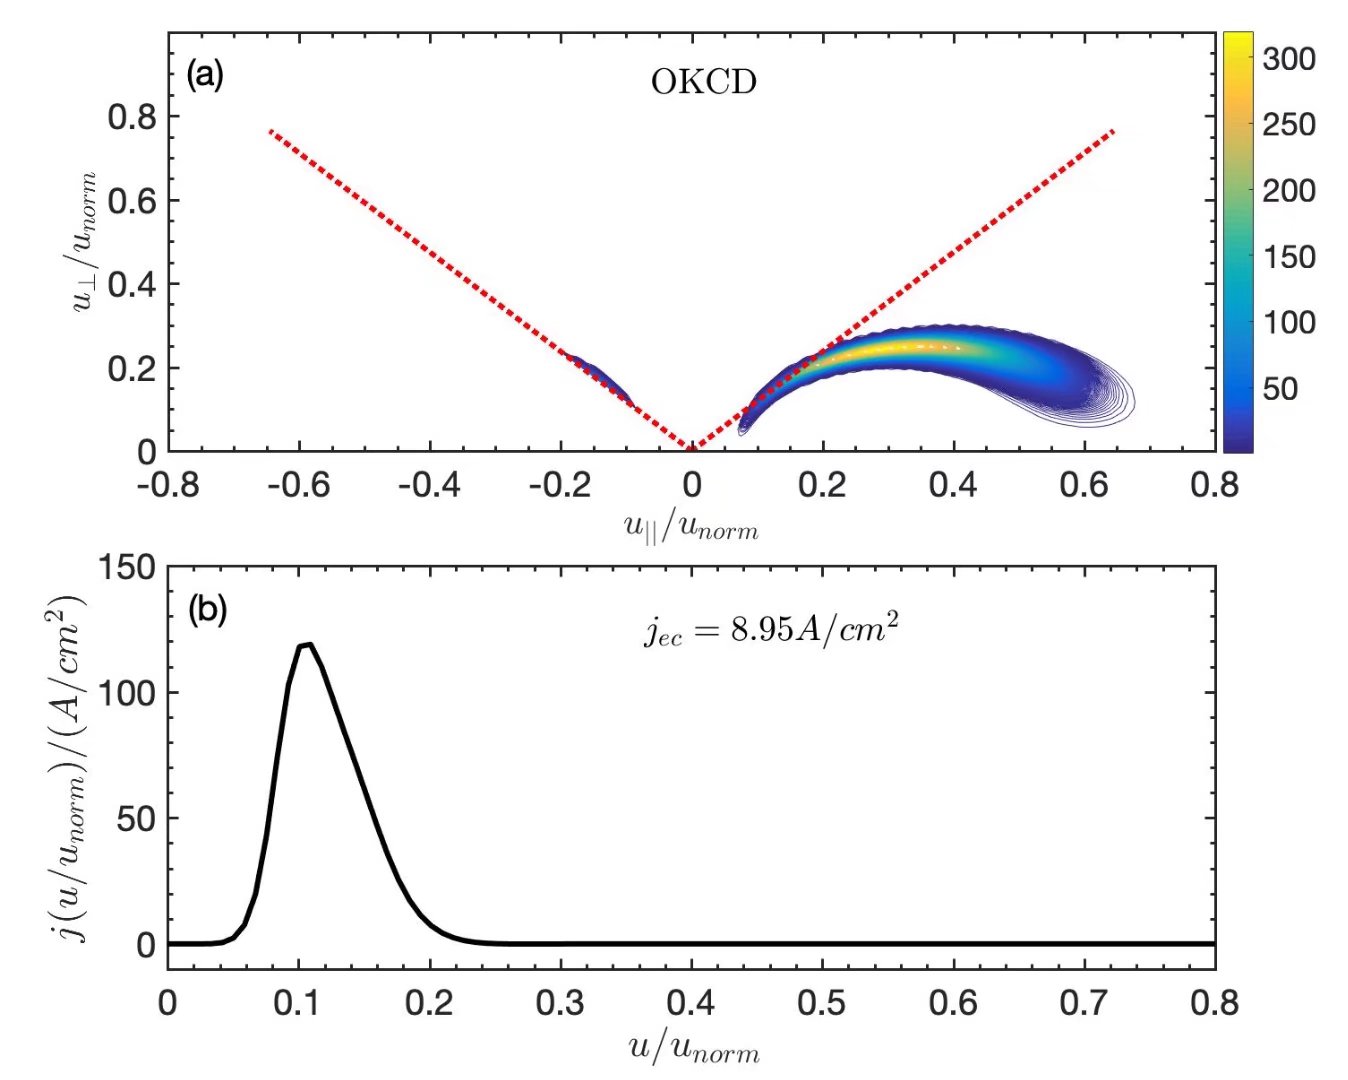 OKCD at the location $\rho=0.69$. (a) Contours of EC quasilinear diffusion strength due to $RF(u^{2}D_{uu})$ in velocity space with the perpendicular and parallel velocities normalized to $u_{norm}$. (b) Profile of driven current versus normalized velocity $u/u_{norm}$, the integrated current density is $j_{ec}=8.59 A$ $cm^{-2}$. The normalized velocity $u_{norm}$ corresponds to velocity of electron with energy 400 keV.